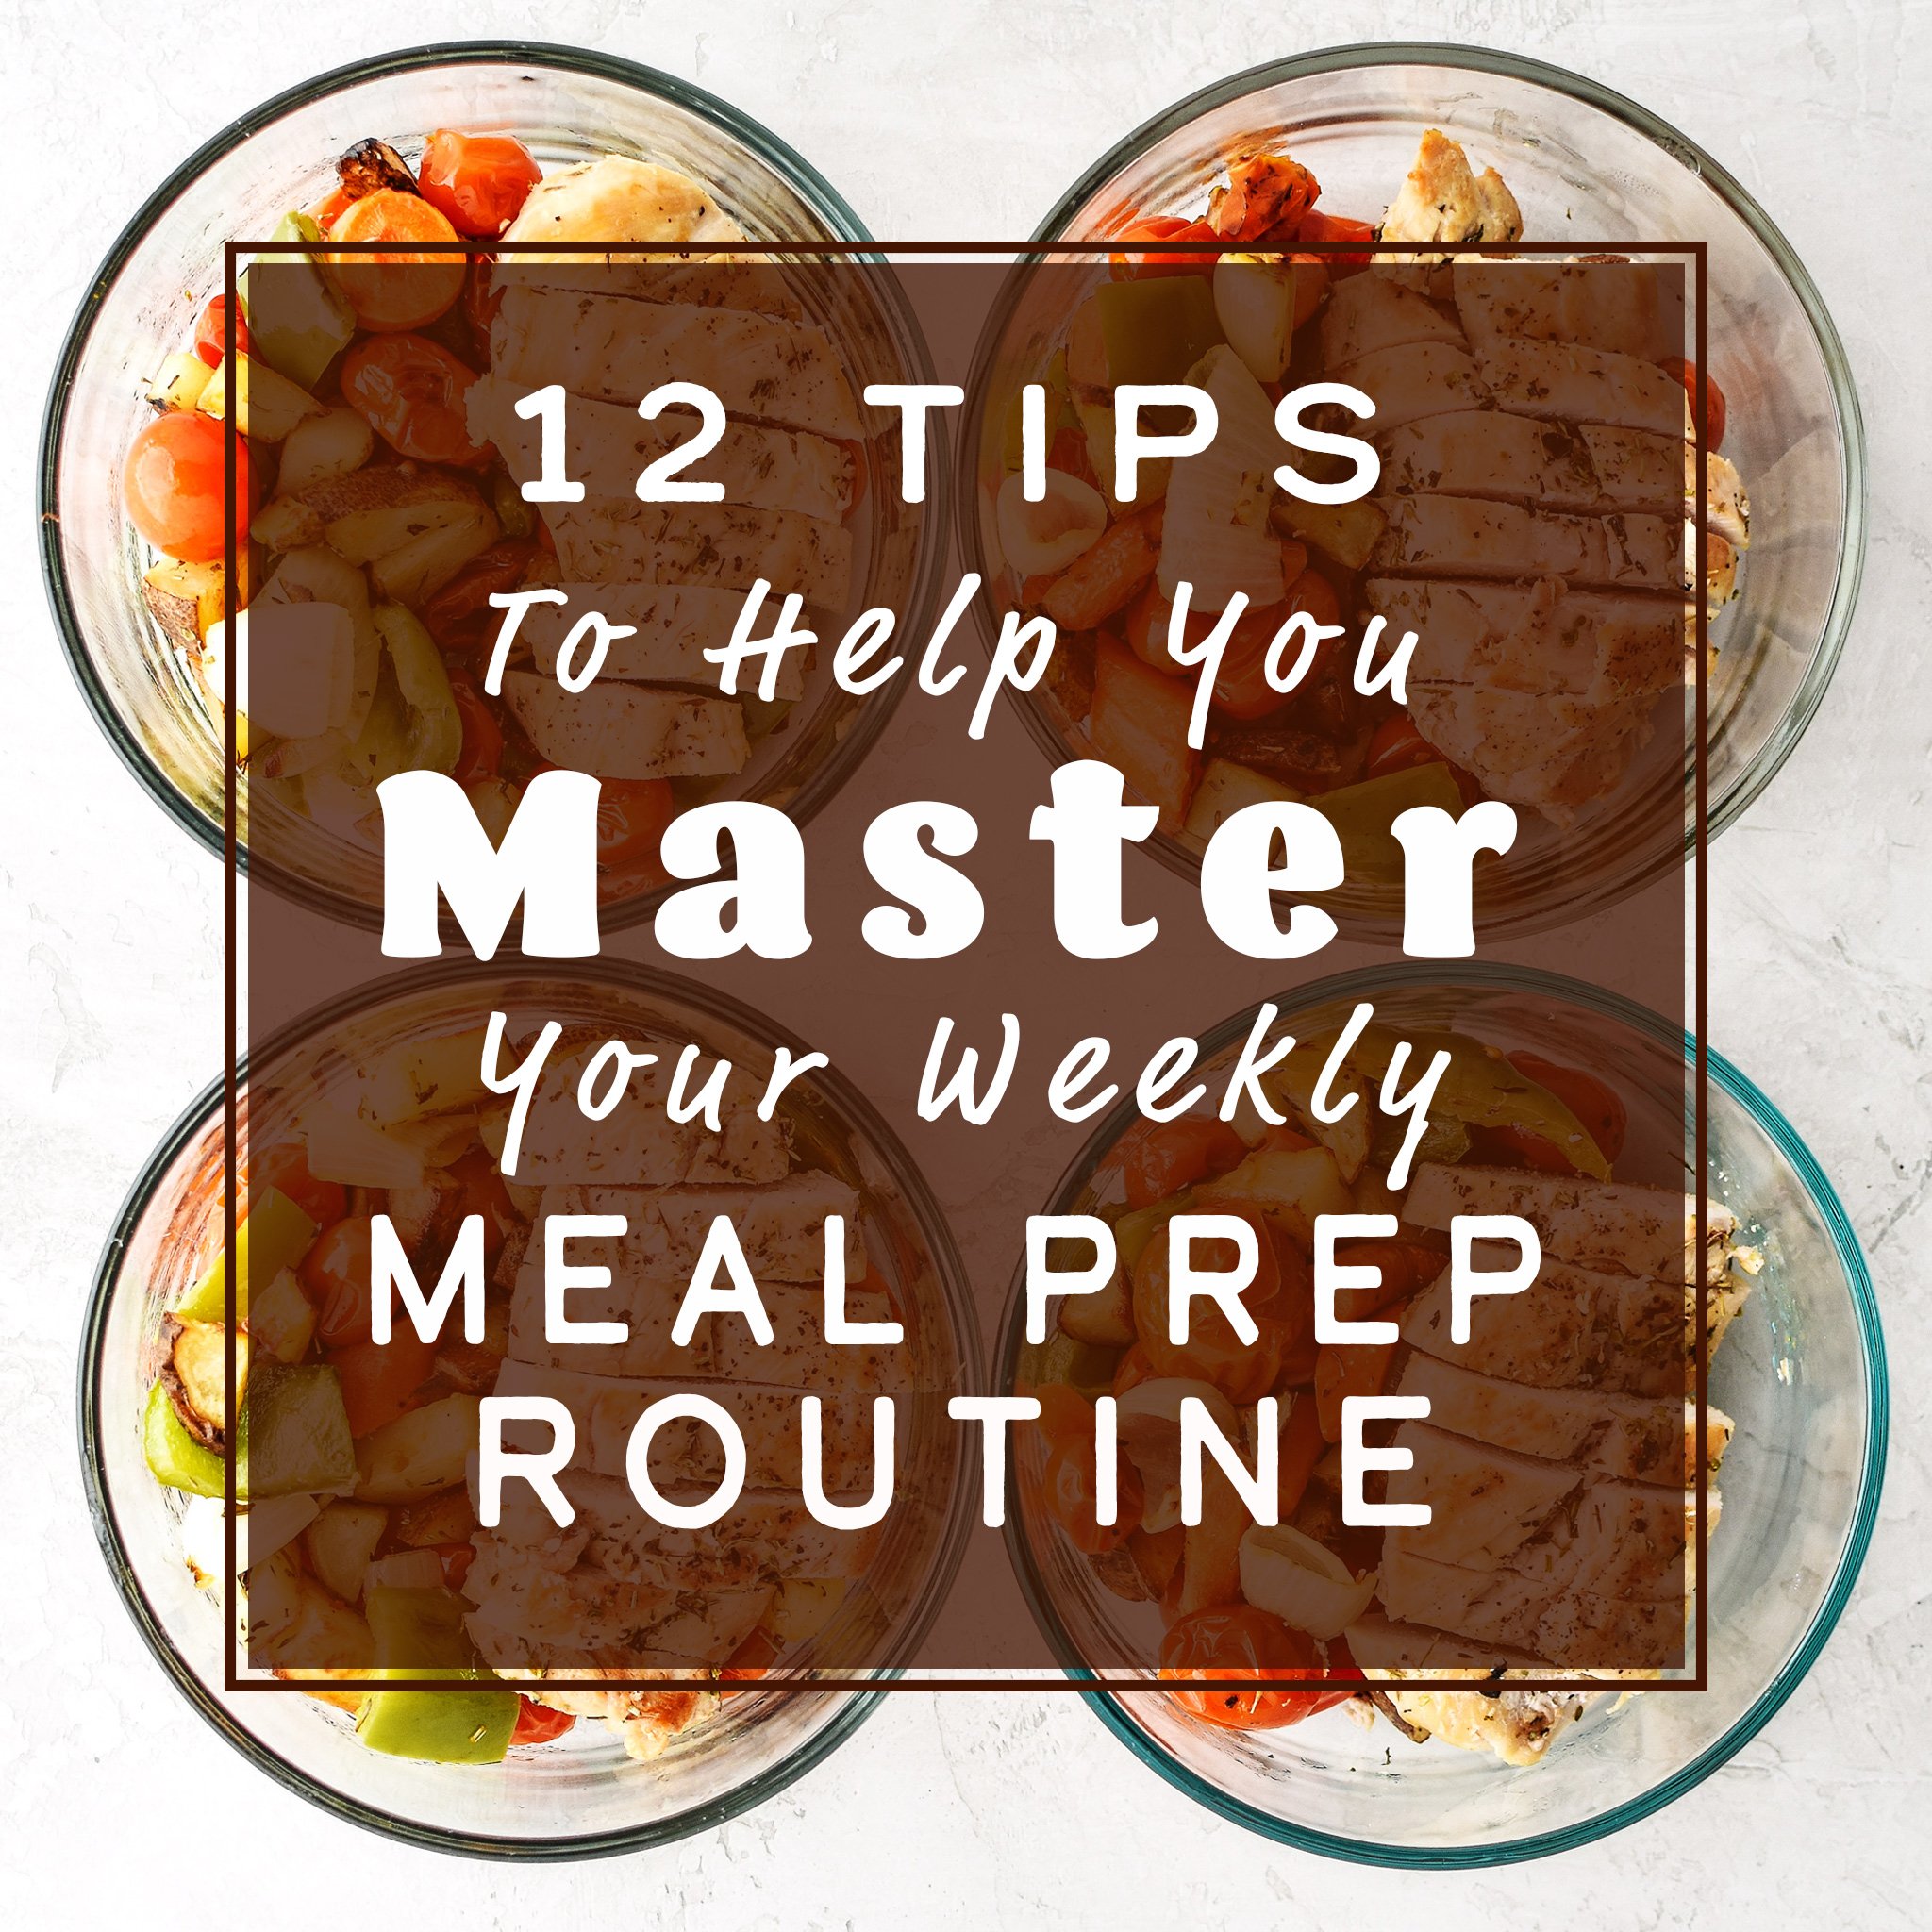 Cover/title image for the article: 12 Tips to Help You Master Your Weekly Meal Prep Routine